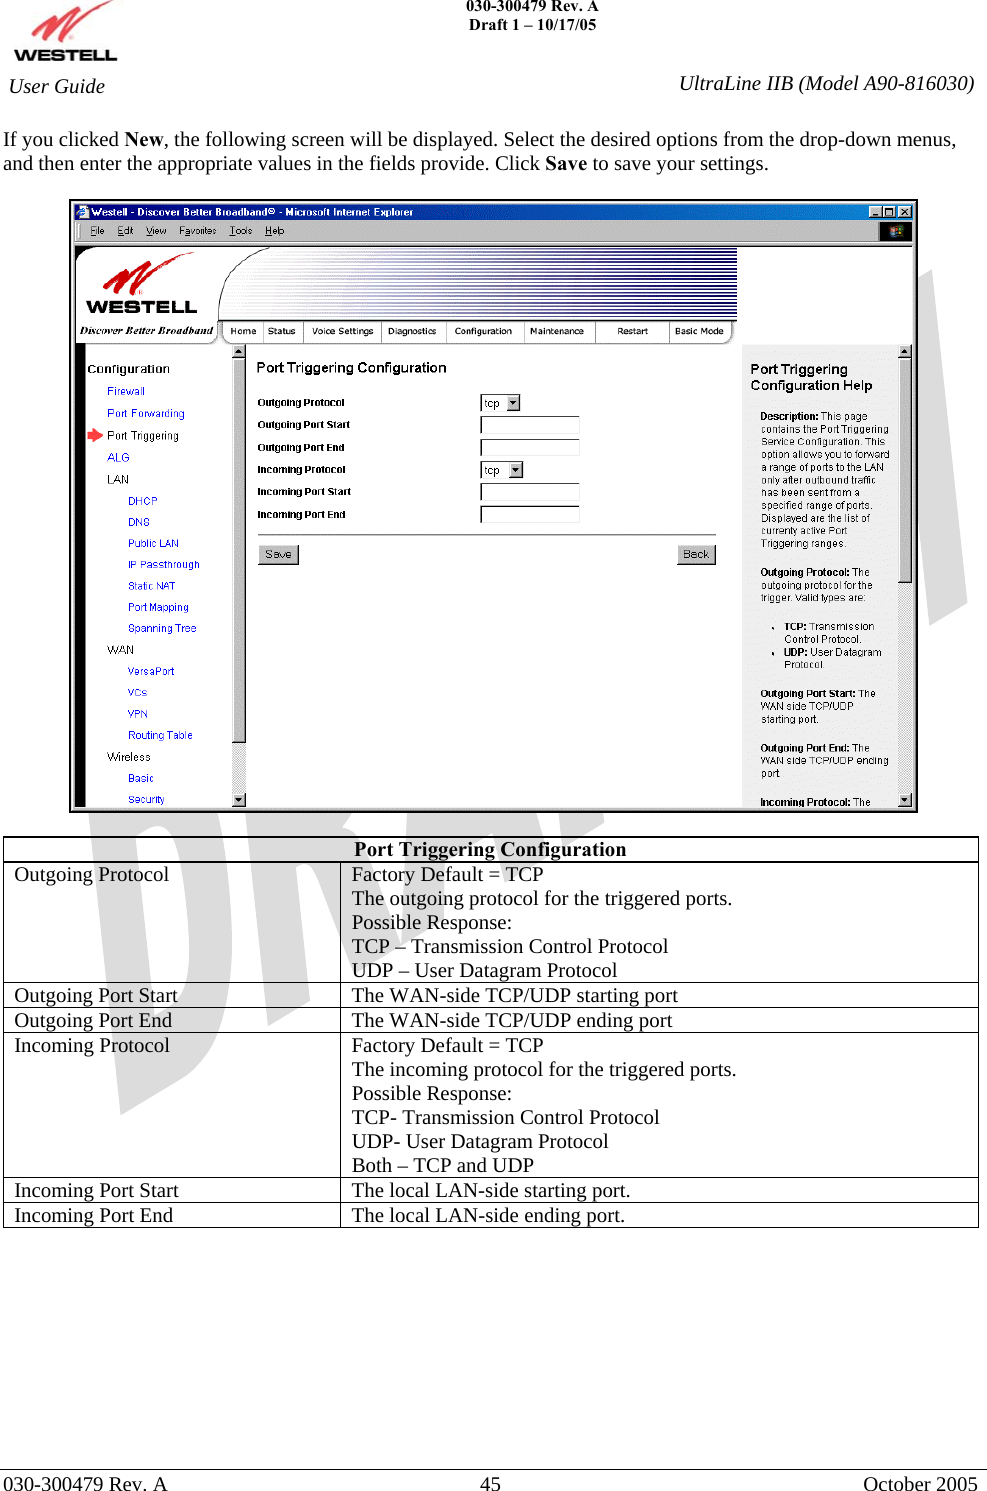    030-300479 Rev. A Draft 1 – 10/17/05   030-300479 Rev. A  45  October 2005  User Guide  UltraLine IIB (Model A90-816030)If you clicked New, the following screen will be displayed. Select the desired options from the drop-down menus, and then enter the appropriate values in the fields provide. Click Save to save your settings.    Port Triggering Configuration Outgoing Protocol  Factory Default = TCP The outgoing protocol for the triggered ports. Possible Response: TCP – Transmission Control Protocol UDP – User Datagram Protocol Outgoing Port Start  The WAN-side TCP/UDP starting port Outgoing Port End   The WAN-side TCP/UDP ending port Incoming Protocol  Factory Default = TCP The incoming protocol for the triggered ports. Possible Response: TCP- Transmission Control Protocol UDP- User Datagram Protocol Both – TCP and UDP Incoming Port Start  The local LAN-side starting port. Incoming Port End  The local LAN-side ending port.           